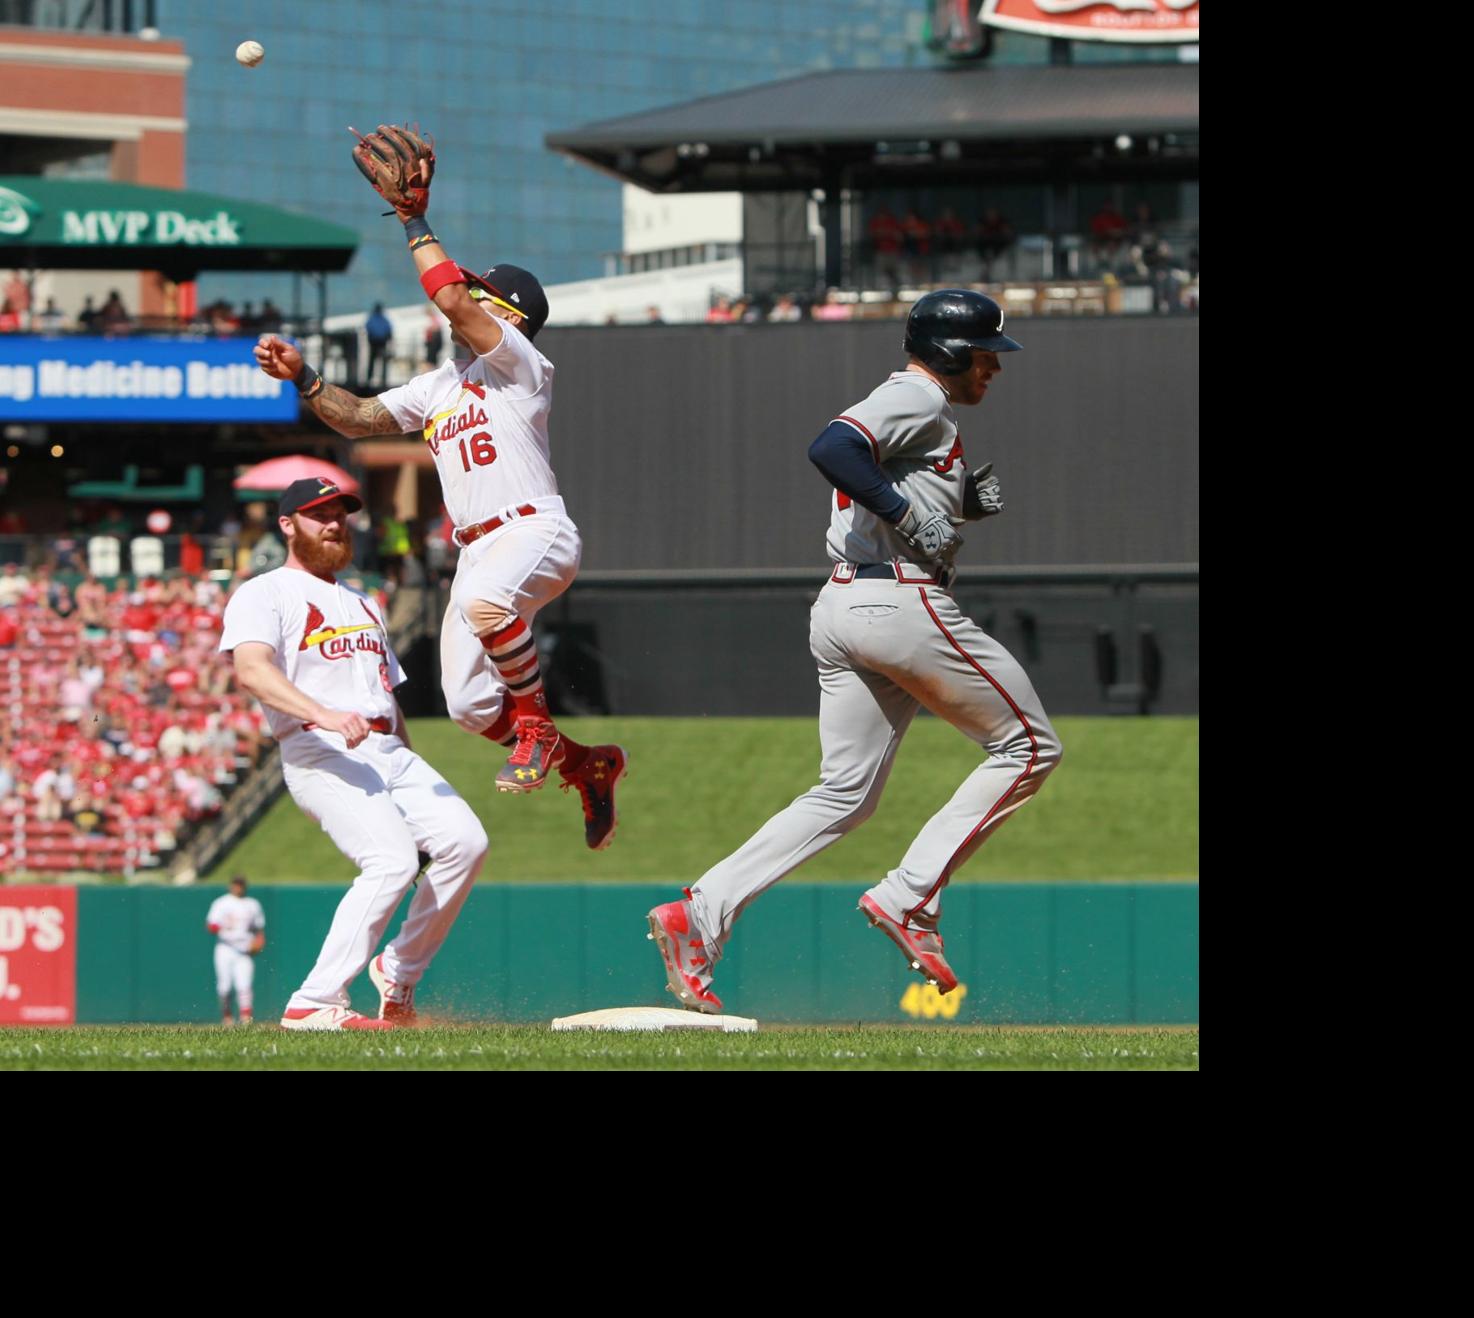 Mistake-prone Cards knuckle under to Braves | St. Louis Cardinals | www.semadata.org